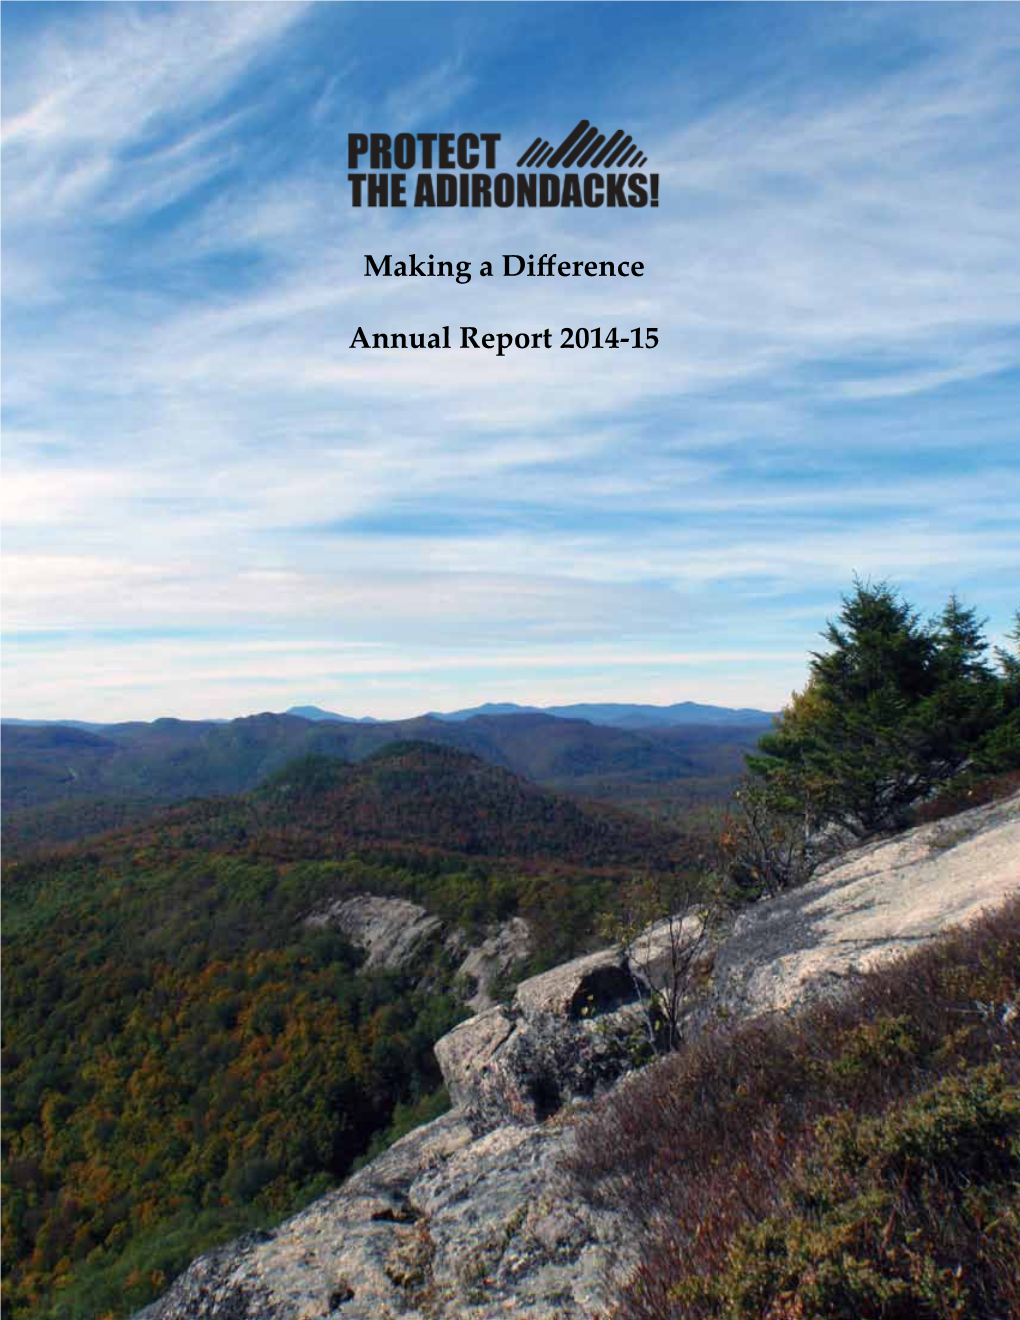 2014-15 Annual Report for Protect The